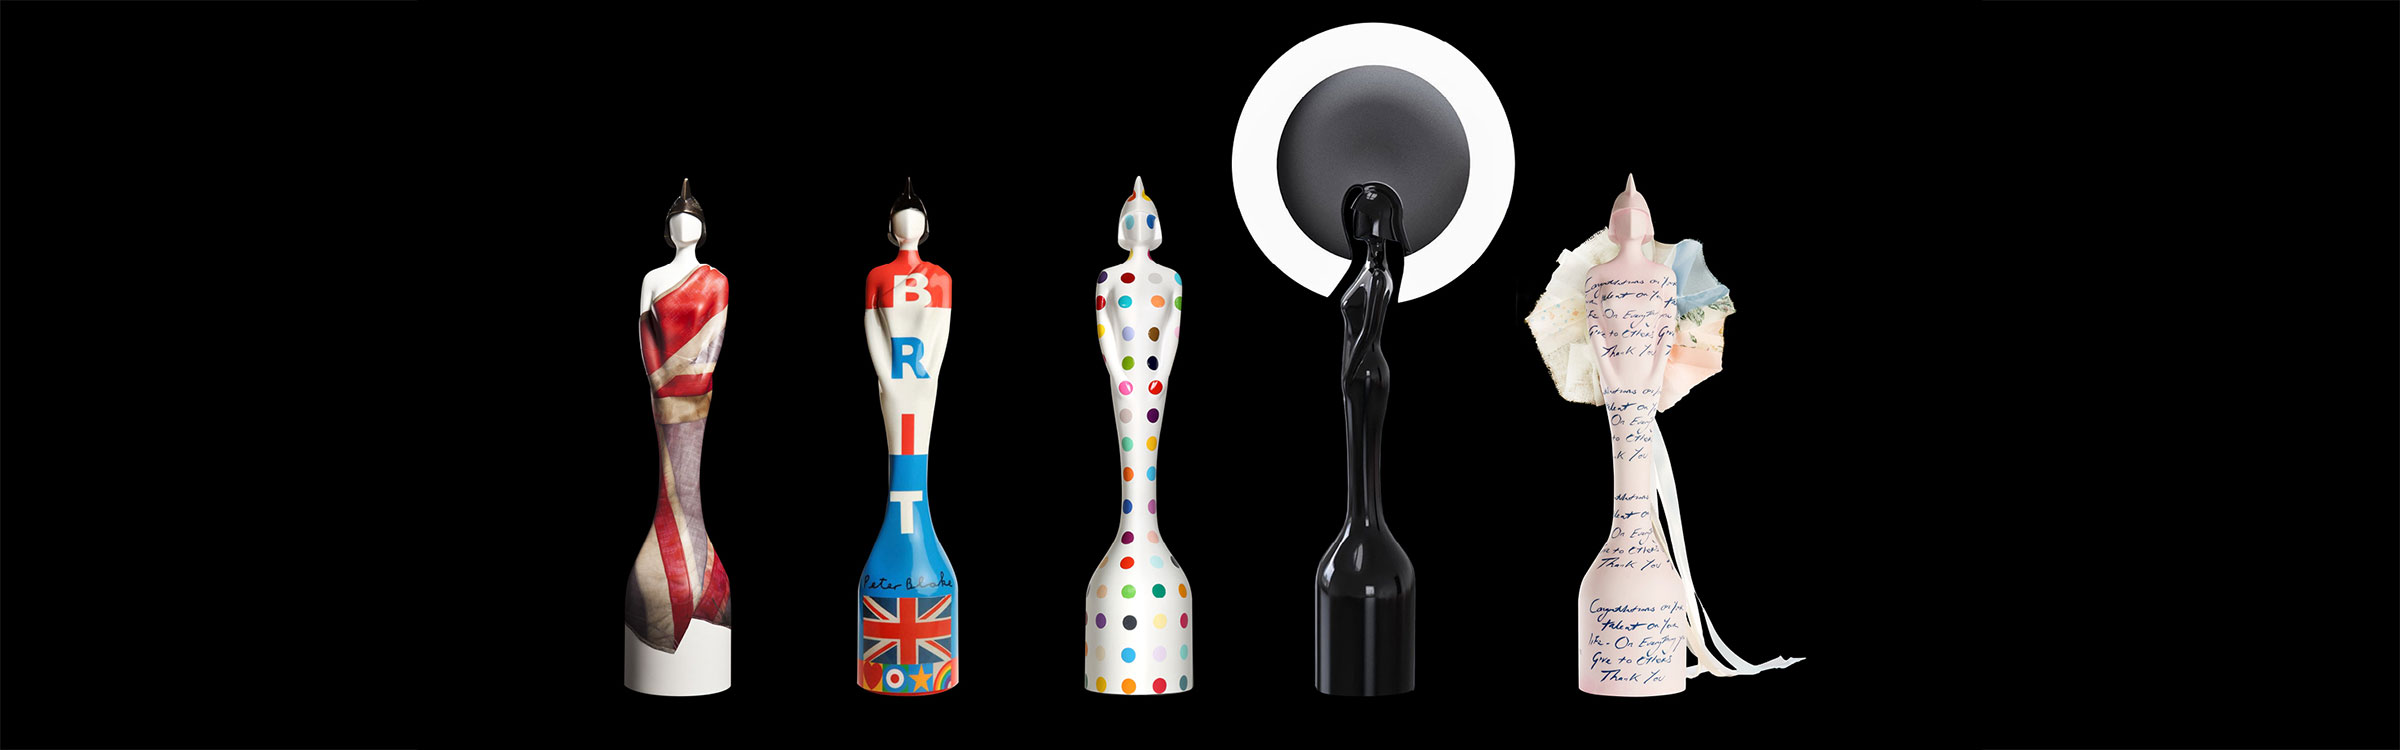 01 the brit awards trophies